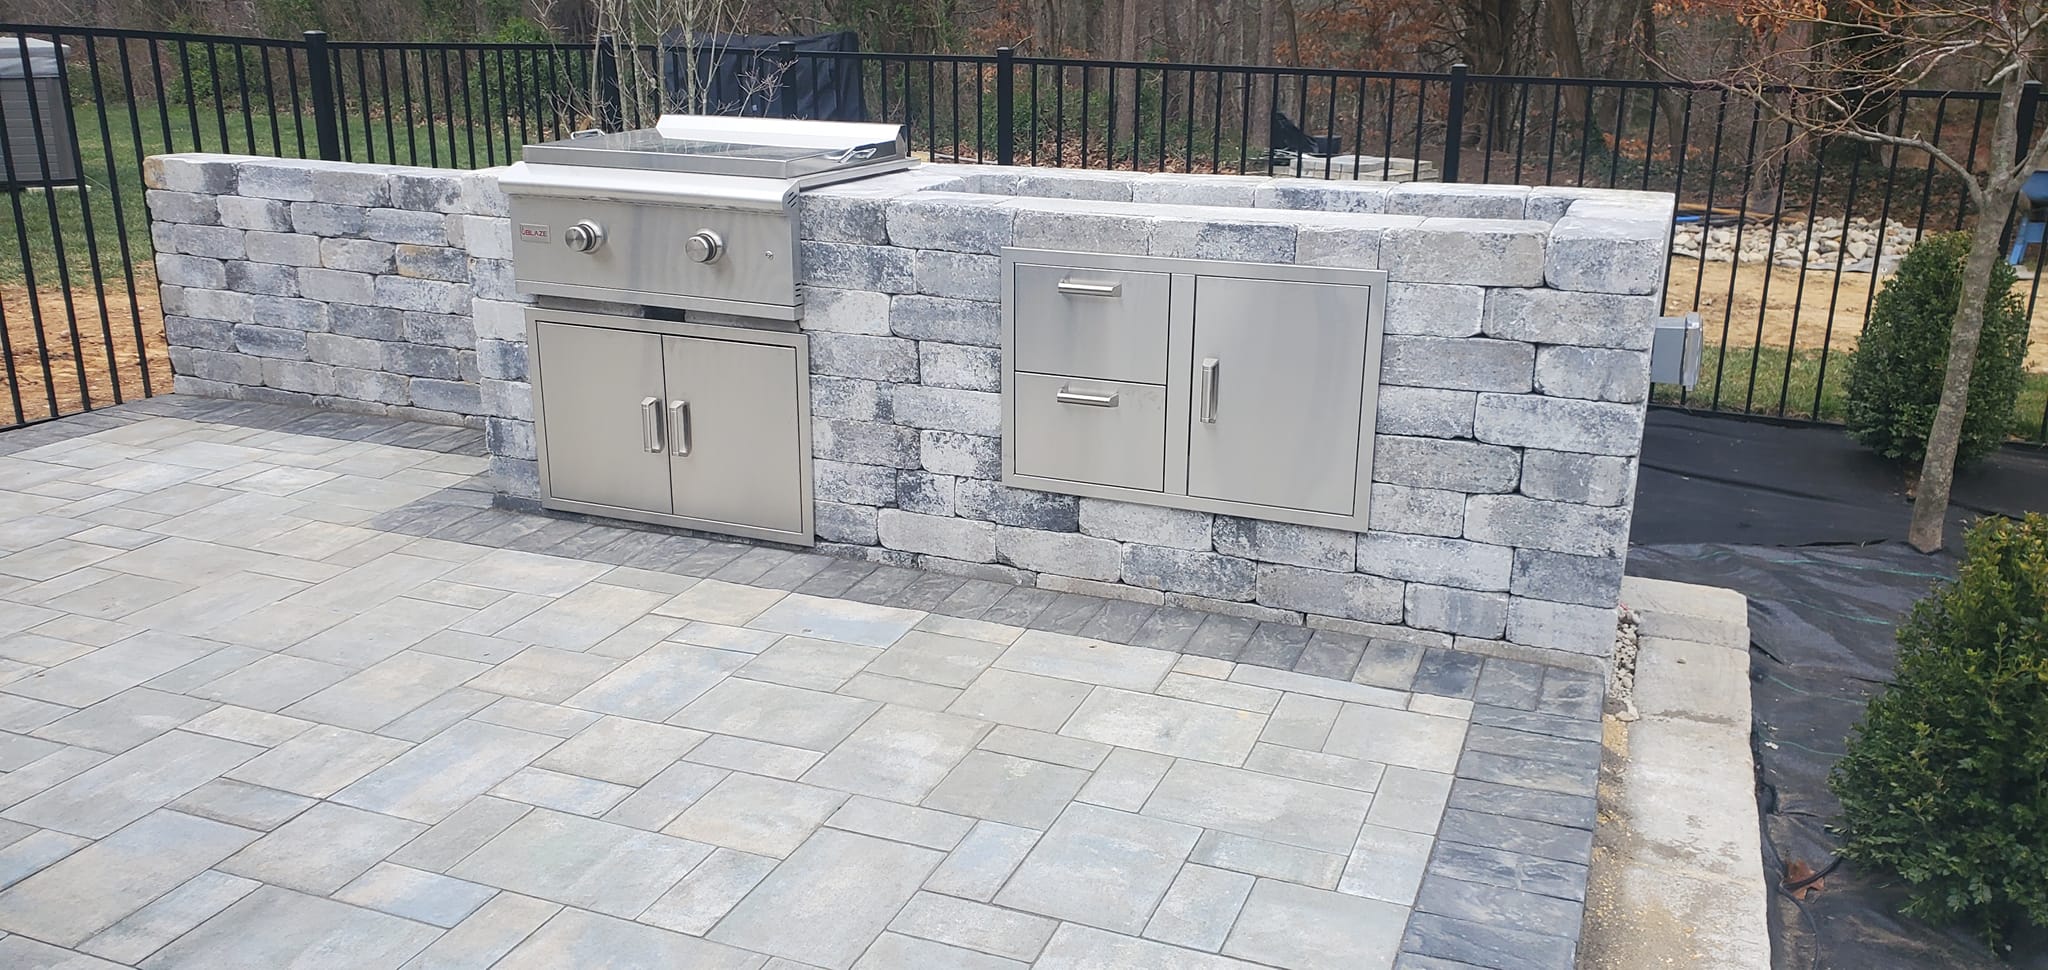 Adam's Lawn & Landscaping St. Mary's County Maryland Paver Patio Kitchen